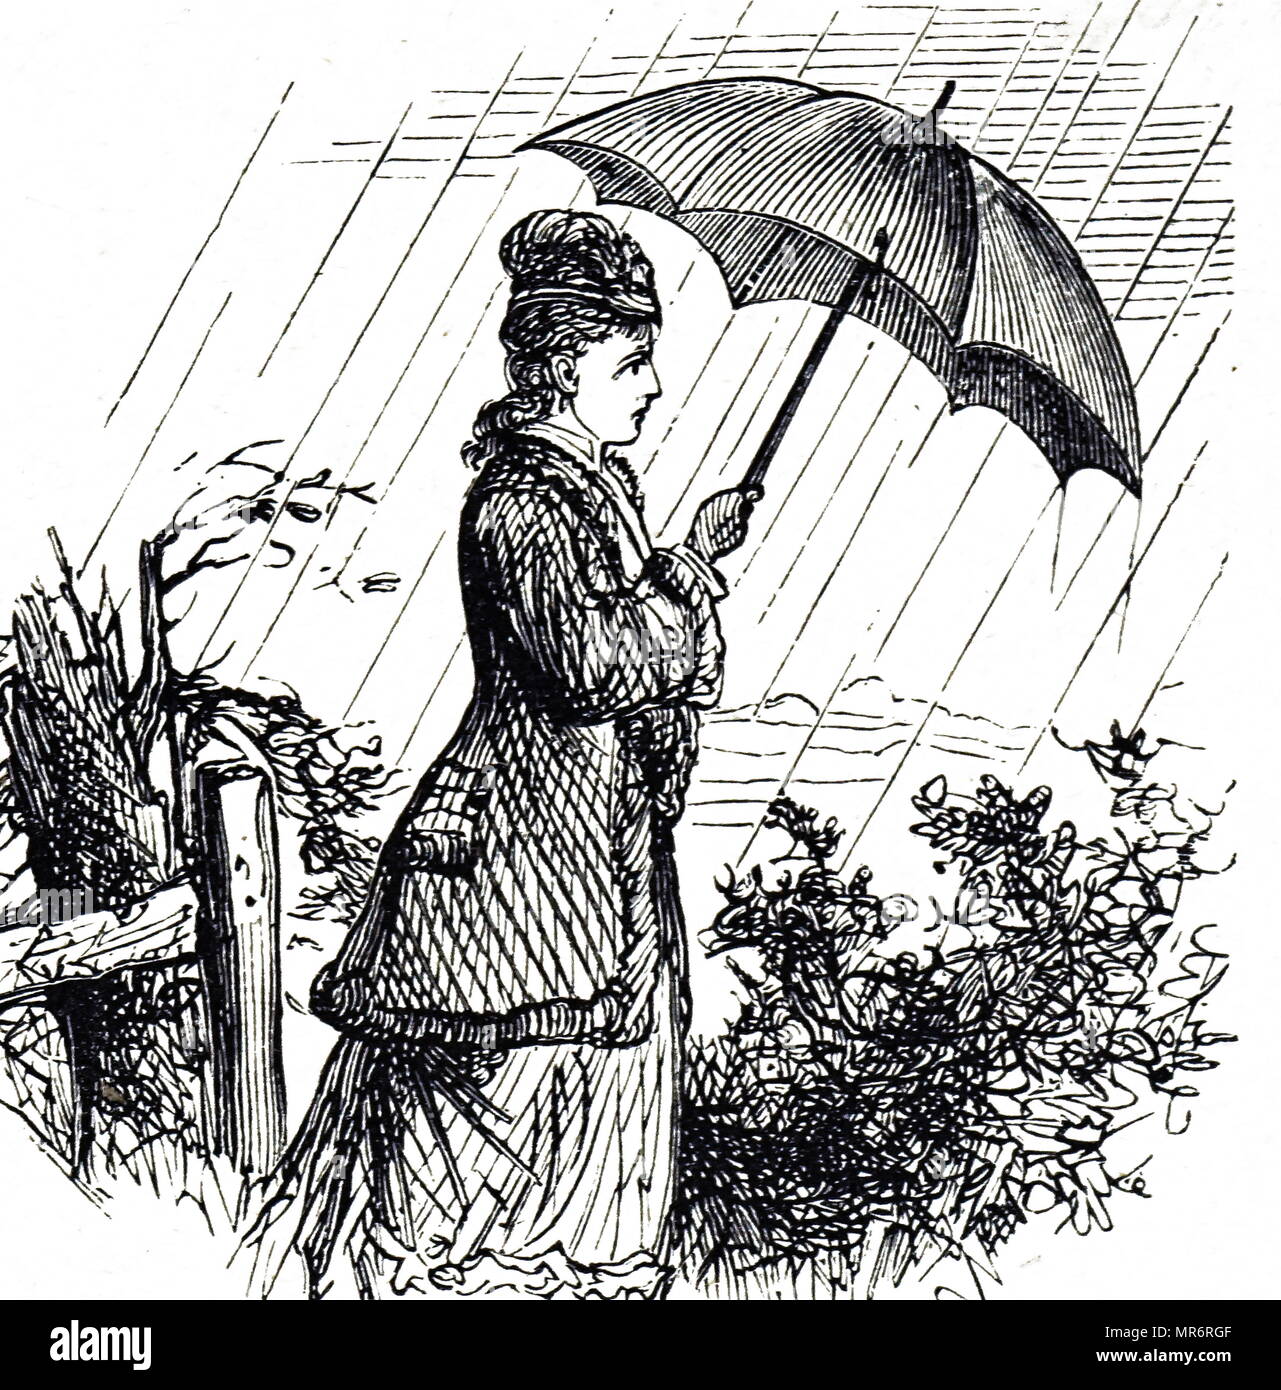 Engraving depicting a young women huddling under an umbrella during a rain storm. The raindrops are seen as lines rather than sports due to persistence of vision. Dated 19th century Stock Photo